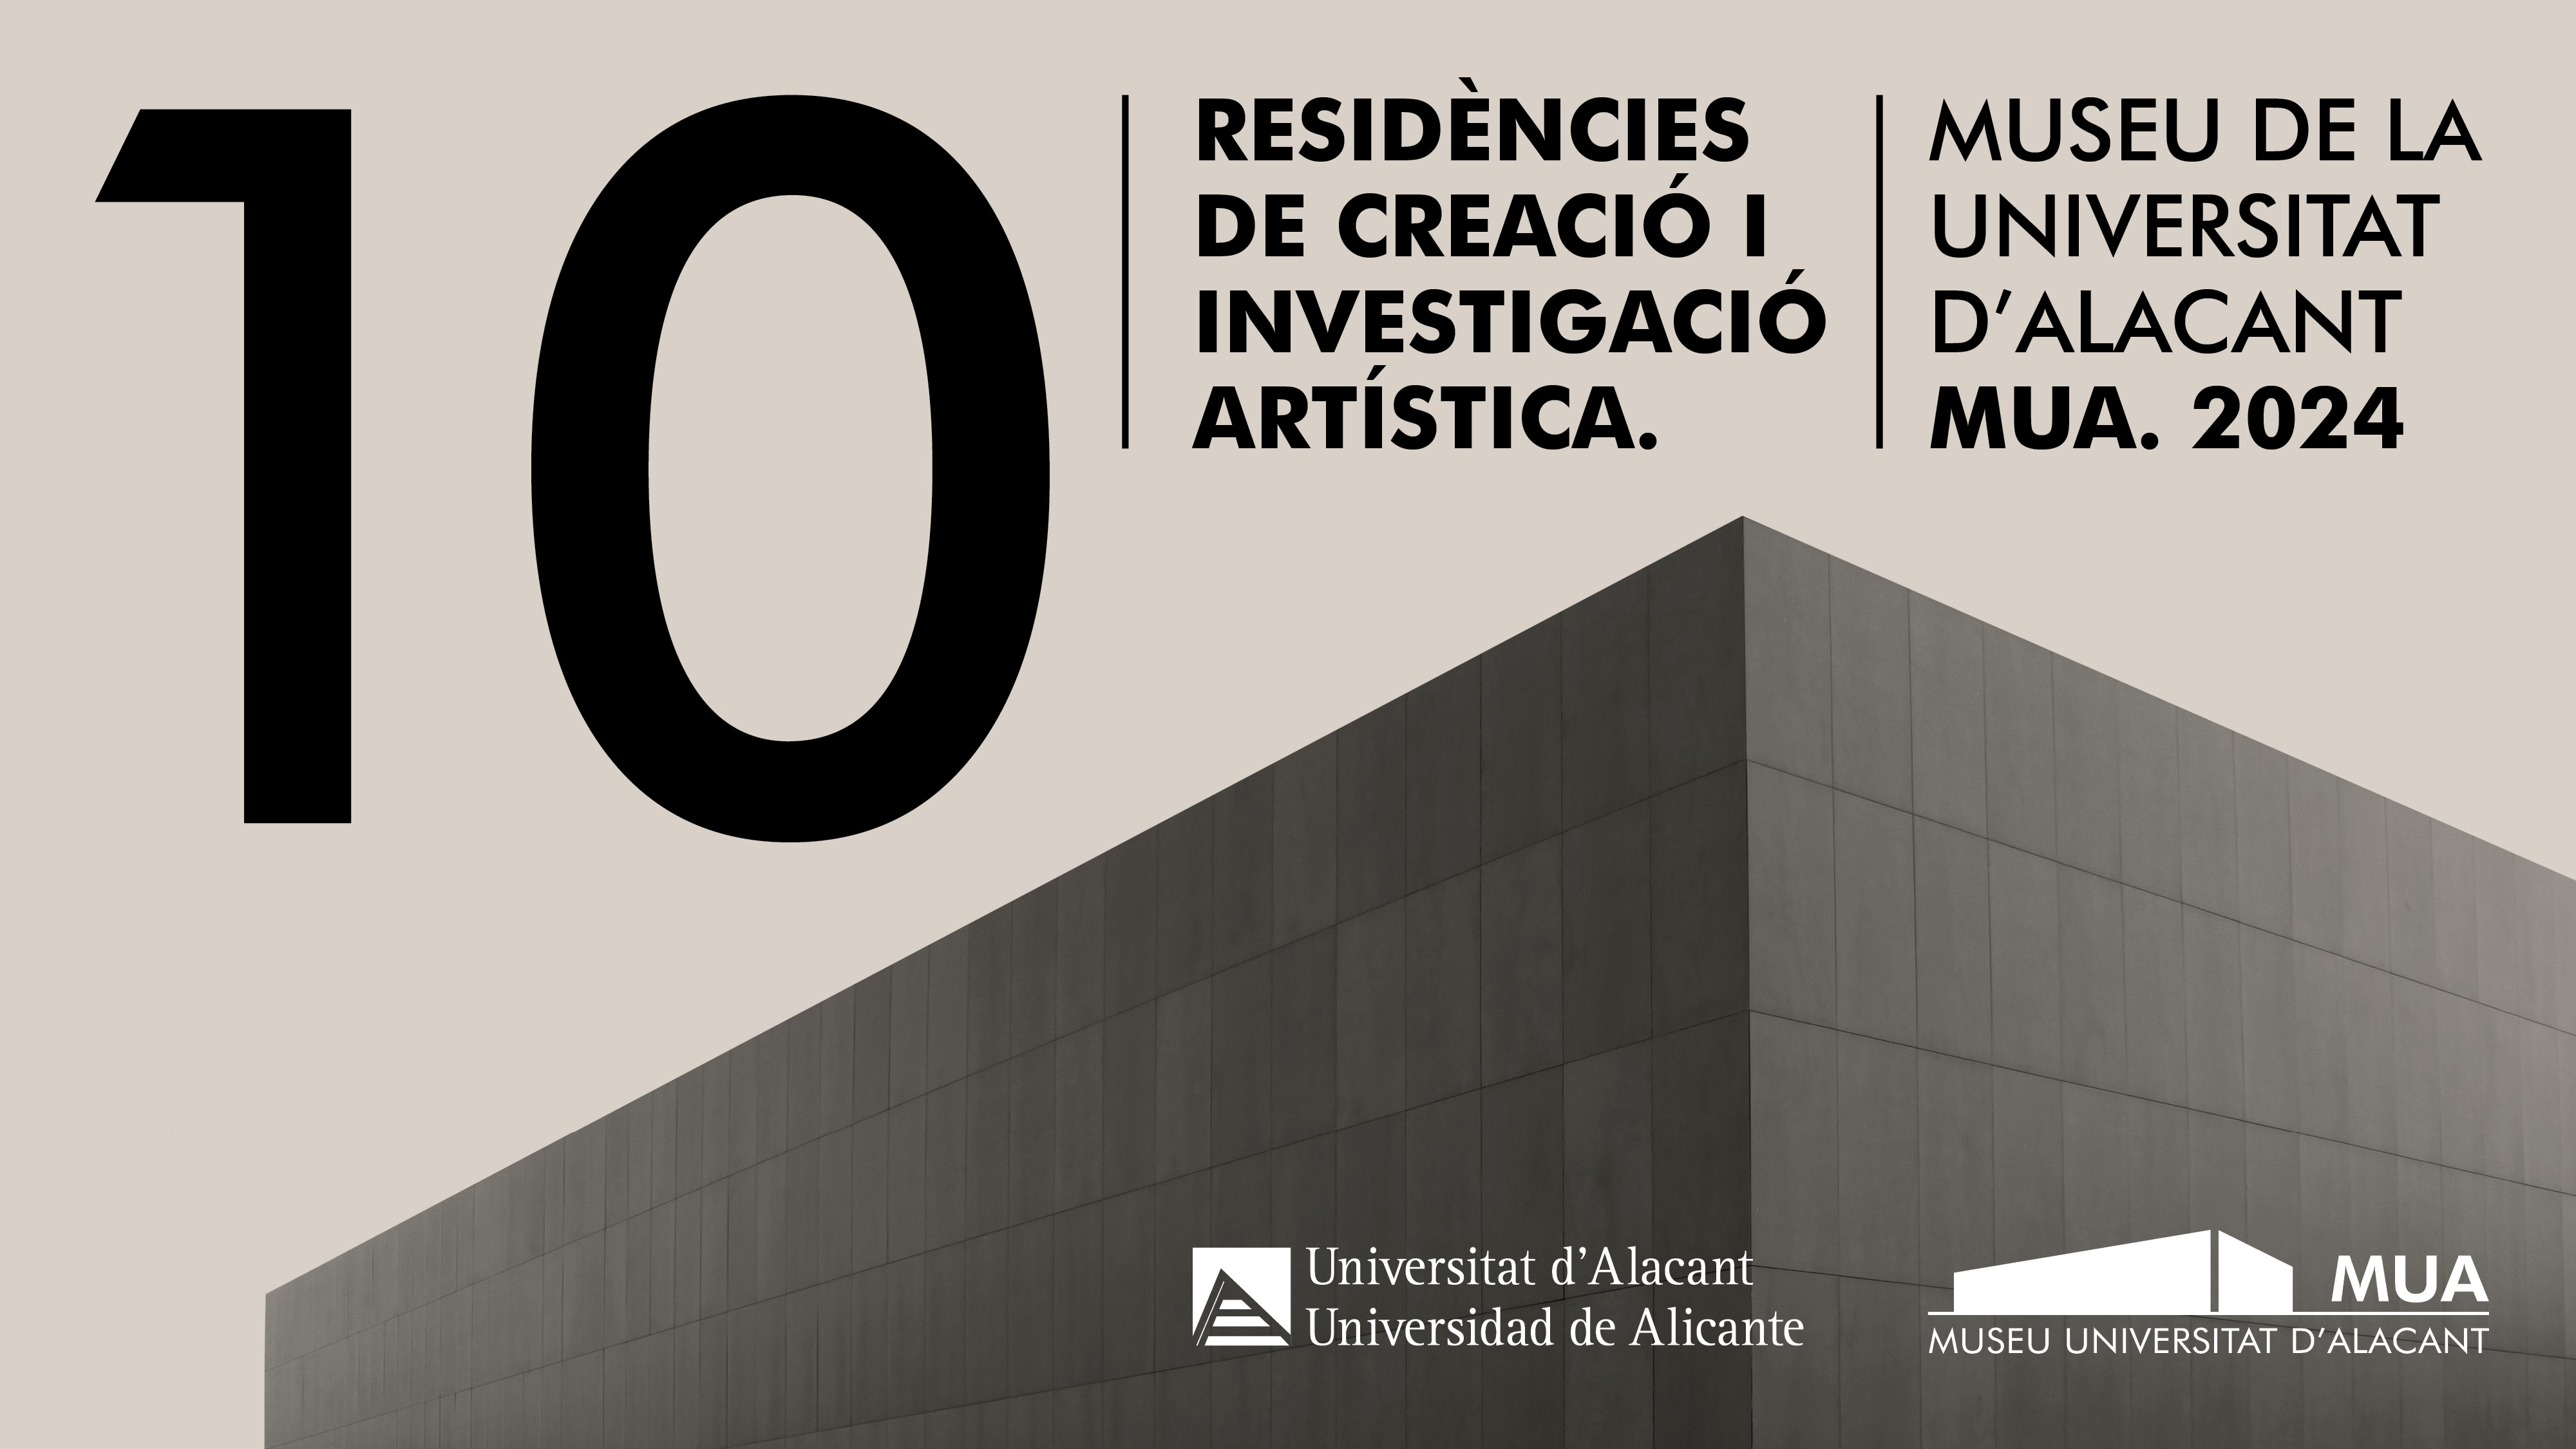 X RESIDENCIES FOR ARTISTIC CREATION AND RESEARCH